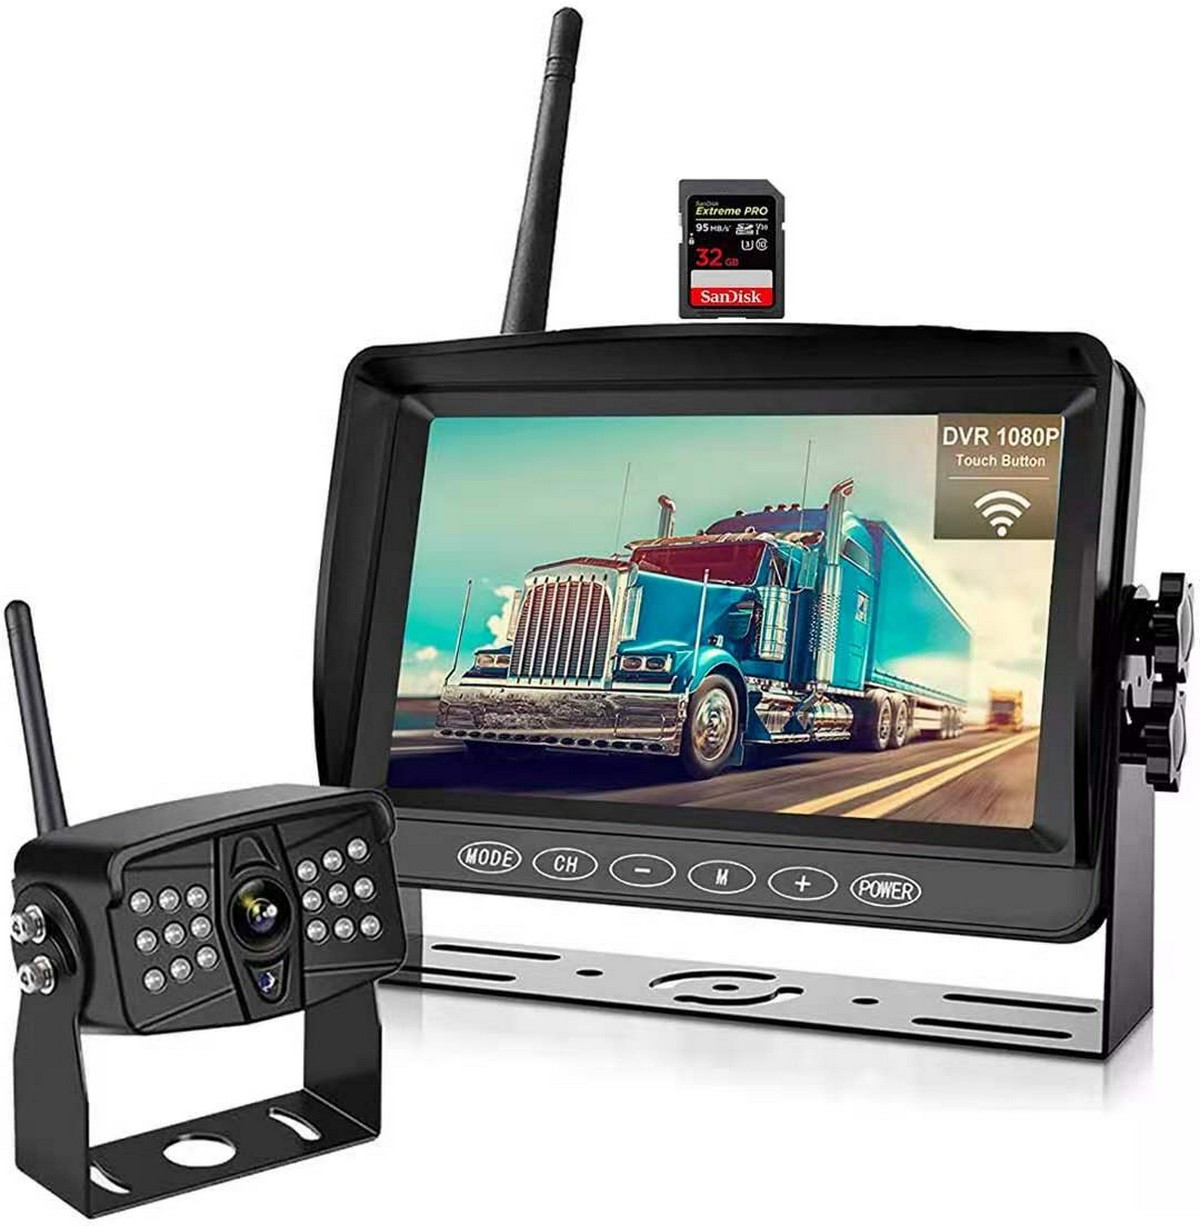 Wifi parking camera with wireless ahd monitor